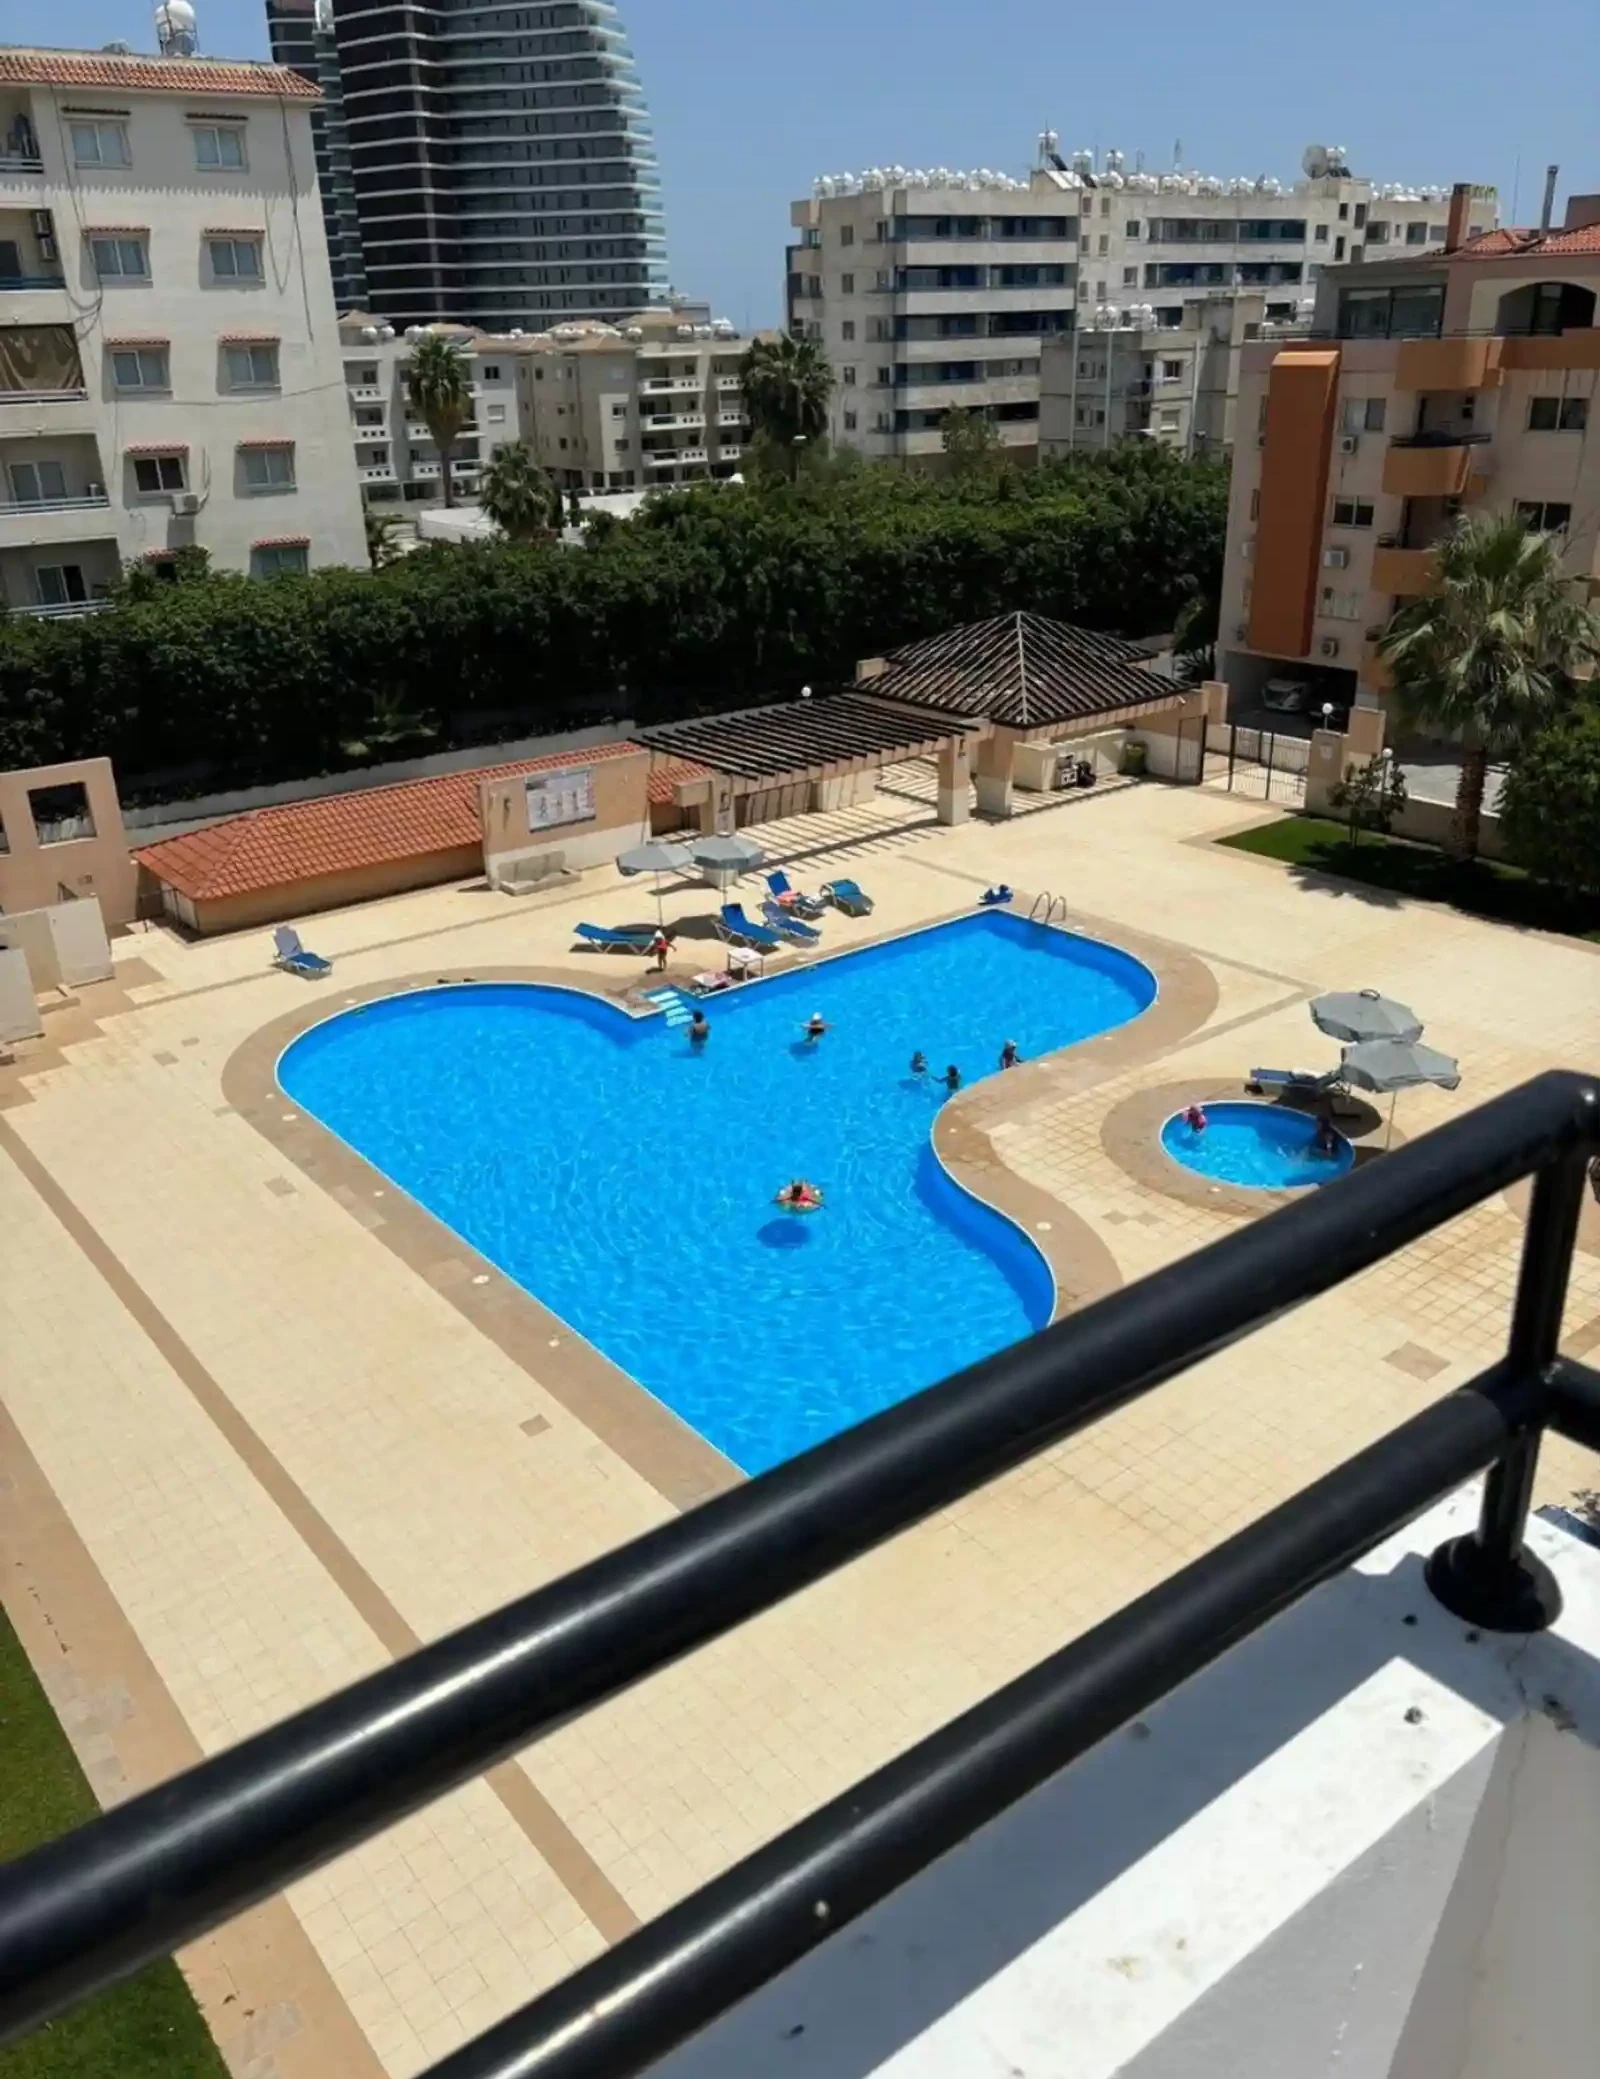 3-bedroom apartment to rent €2.800, image 1